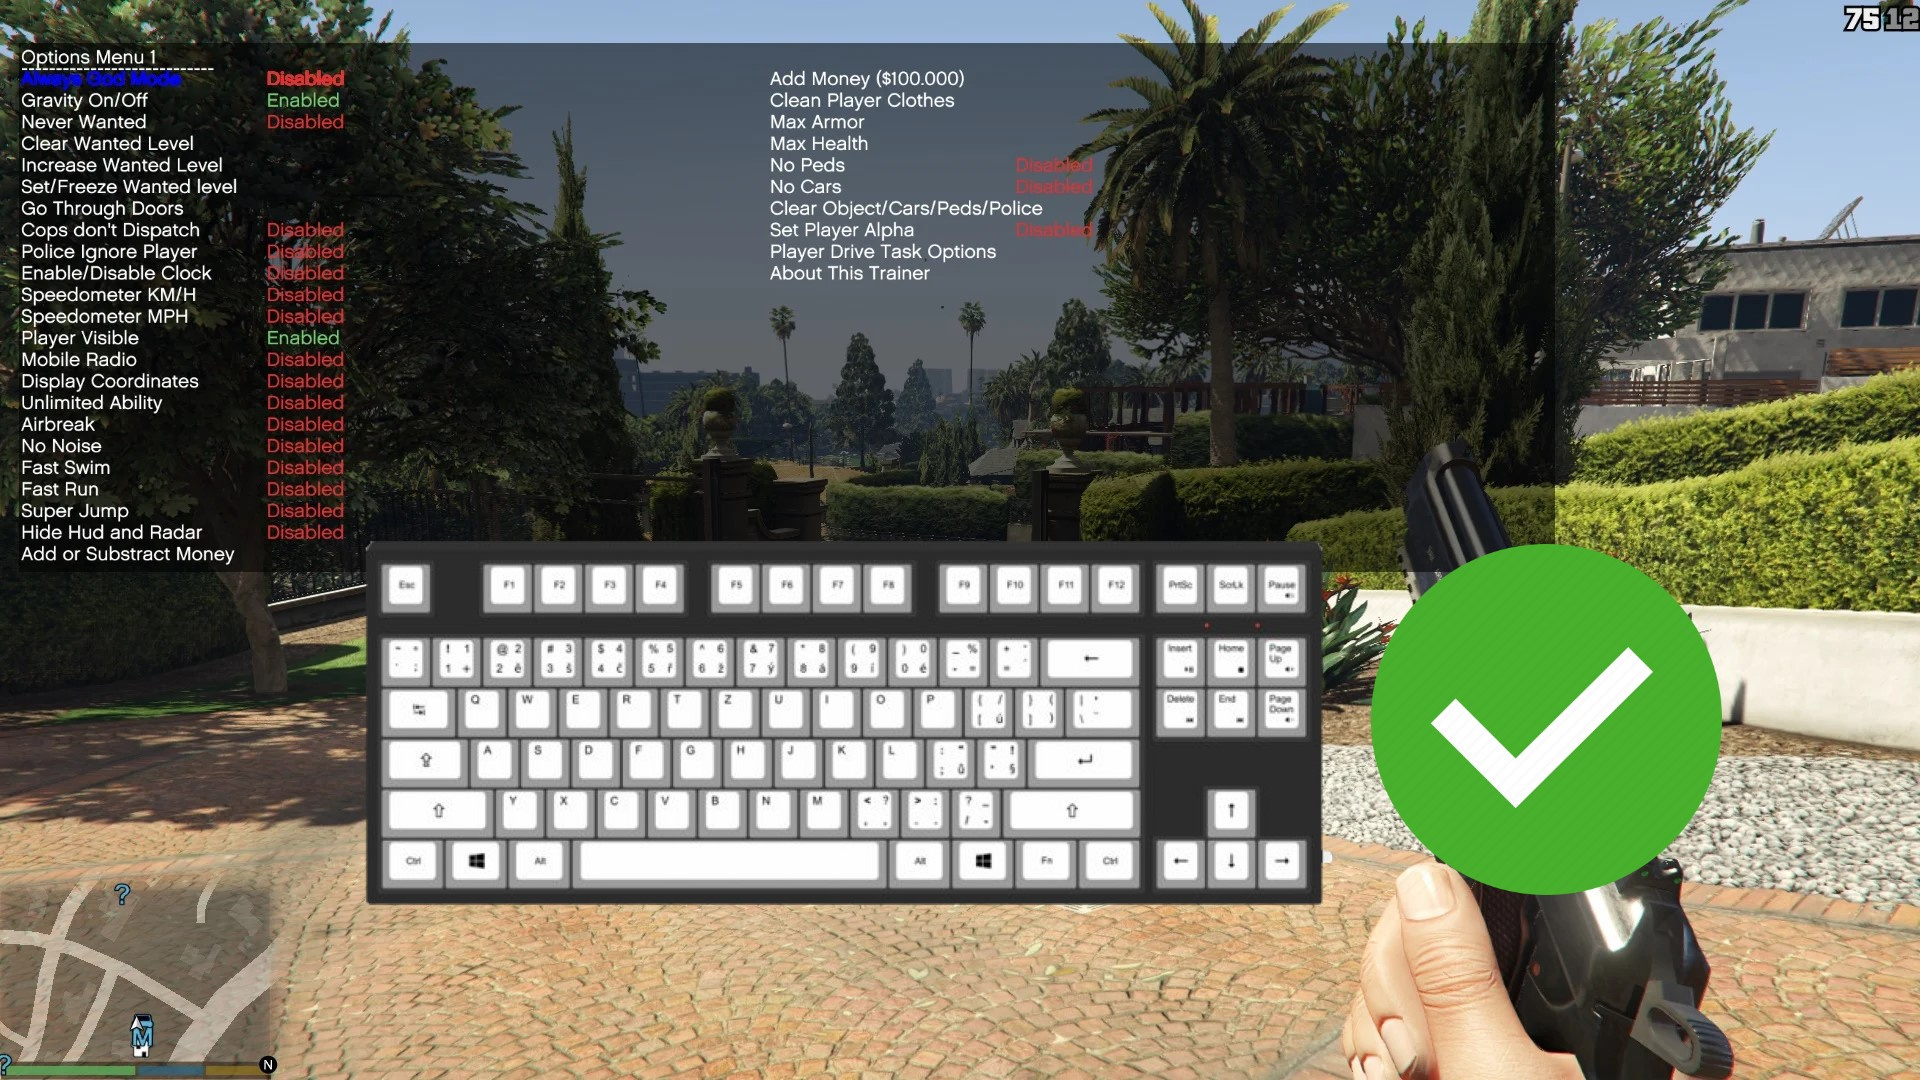 Download Simple Trainer for GTA V 4.4 for GTA 5